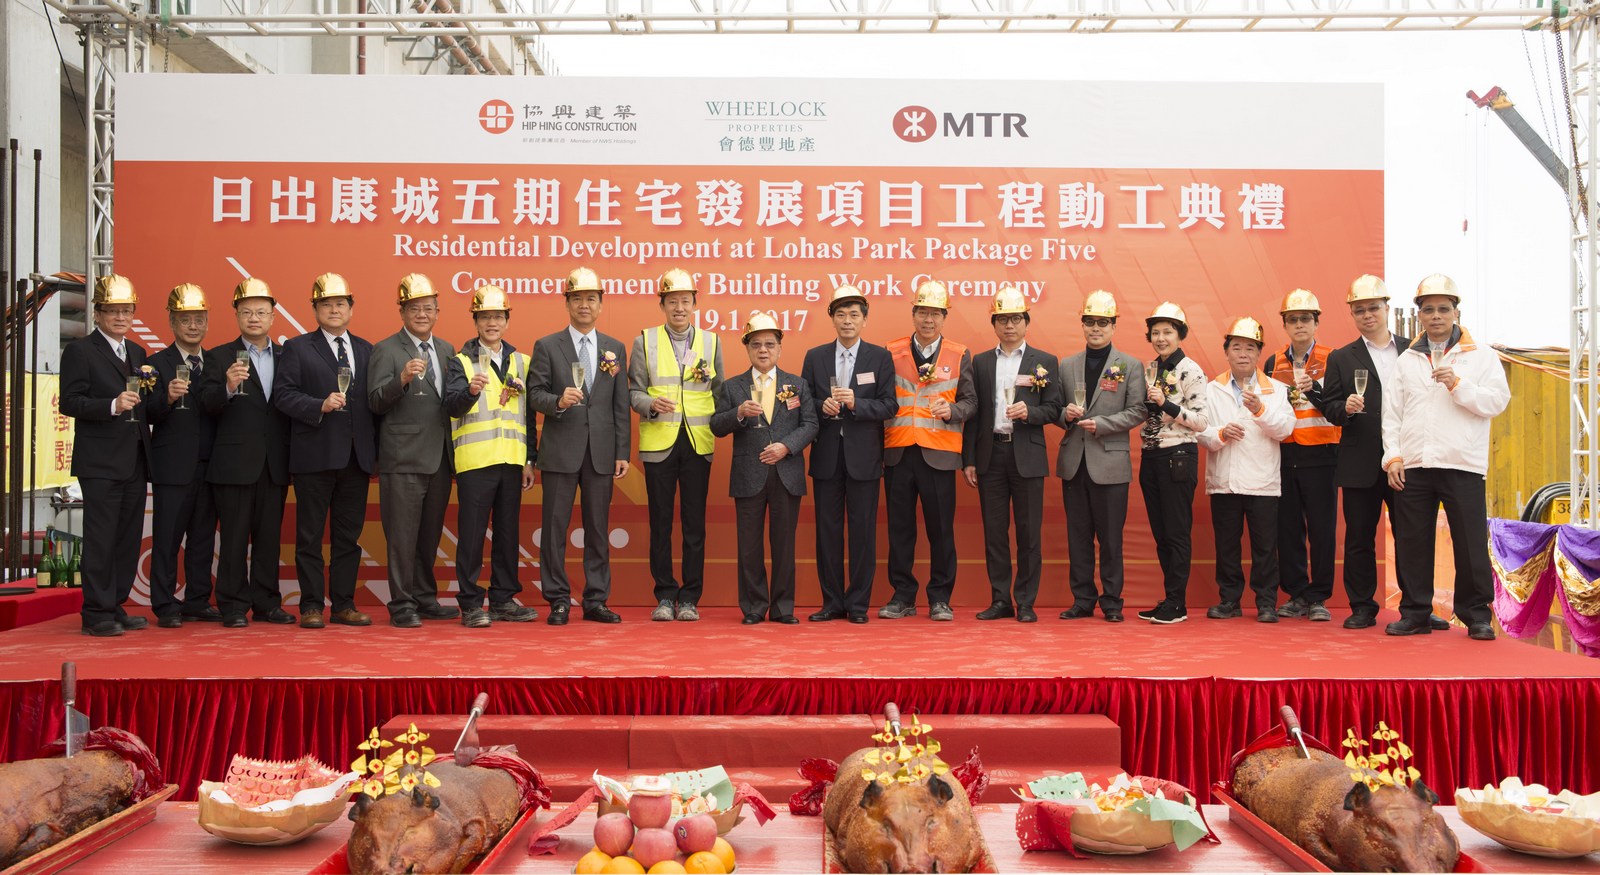 Commencement of building works ceremony